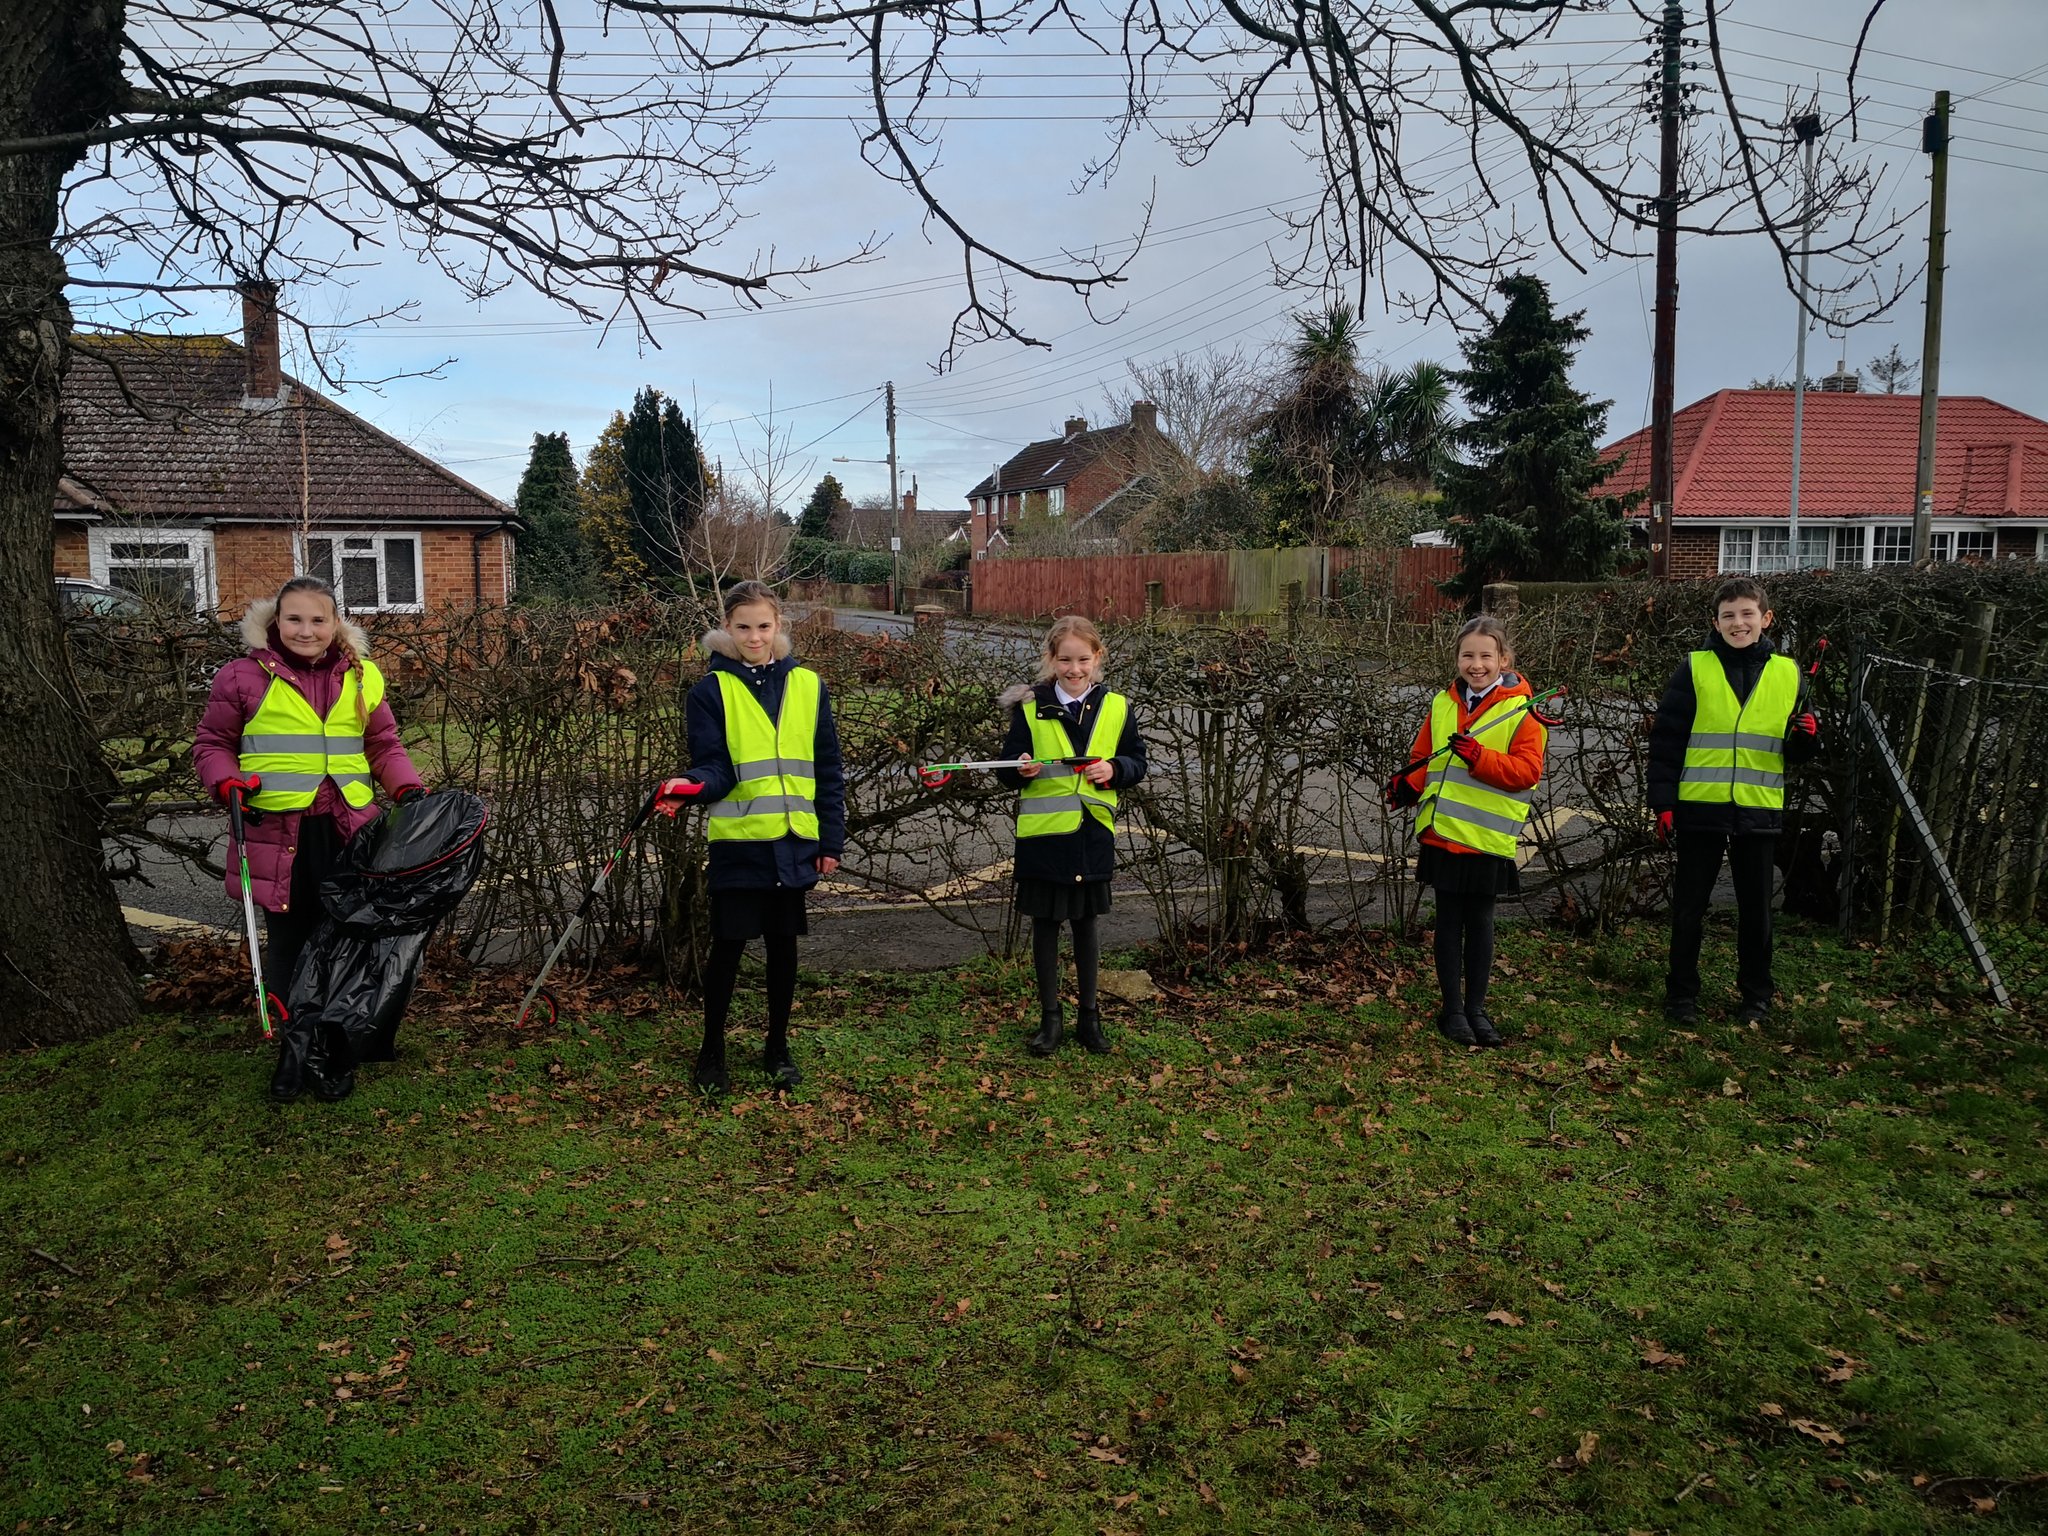 Litter picking in the community